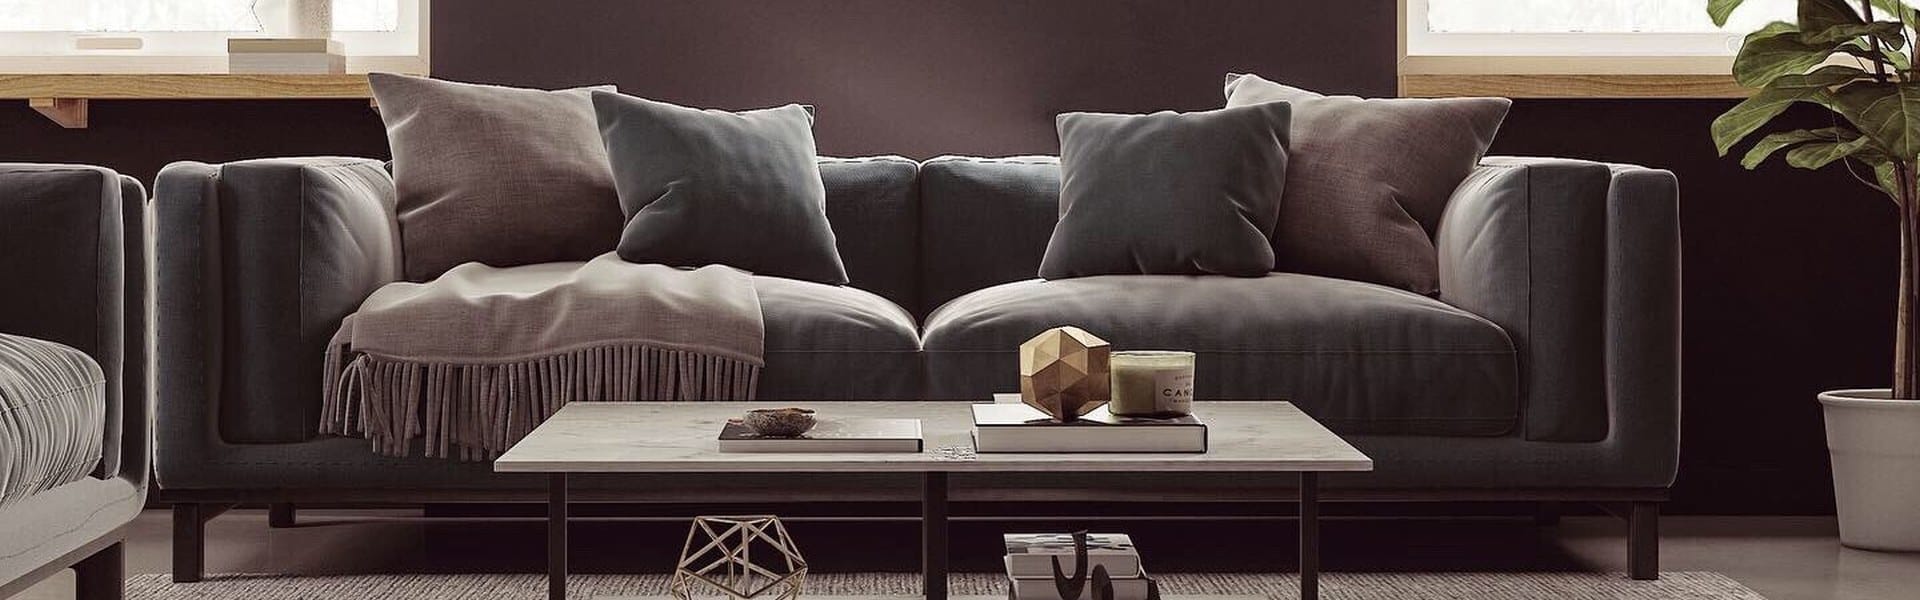 A gray sofa and coffee table